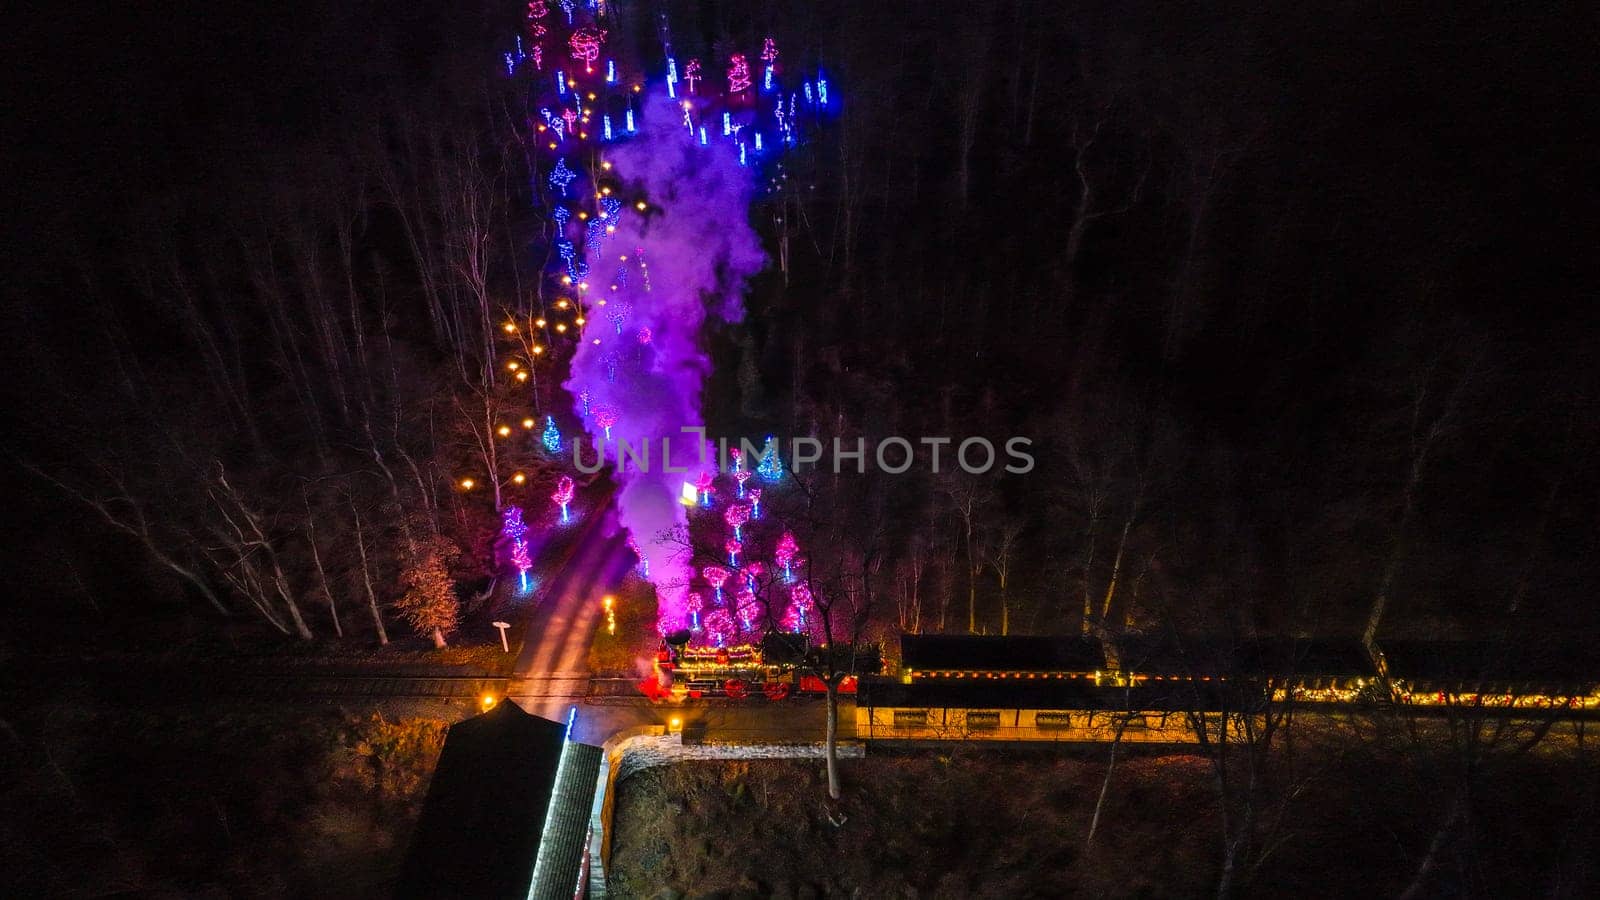 An Aerial View Of A Vibrantly Lit Train Emitting Purple Smoke As It Passes Through A Forested Area At Night.